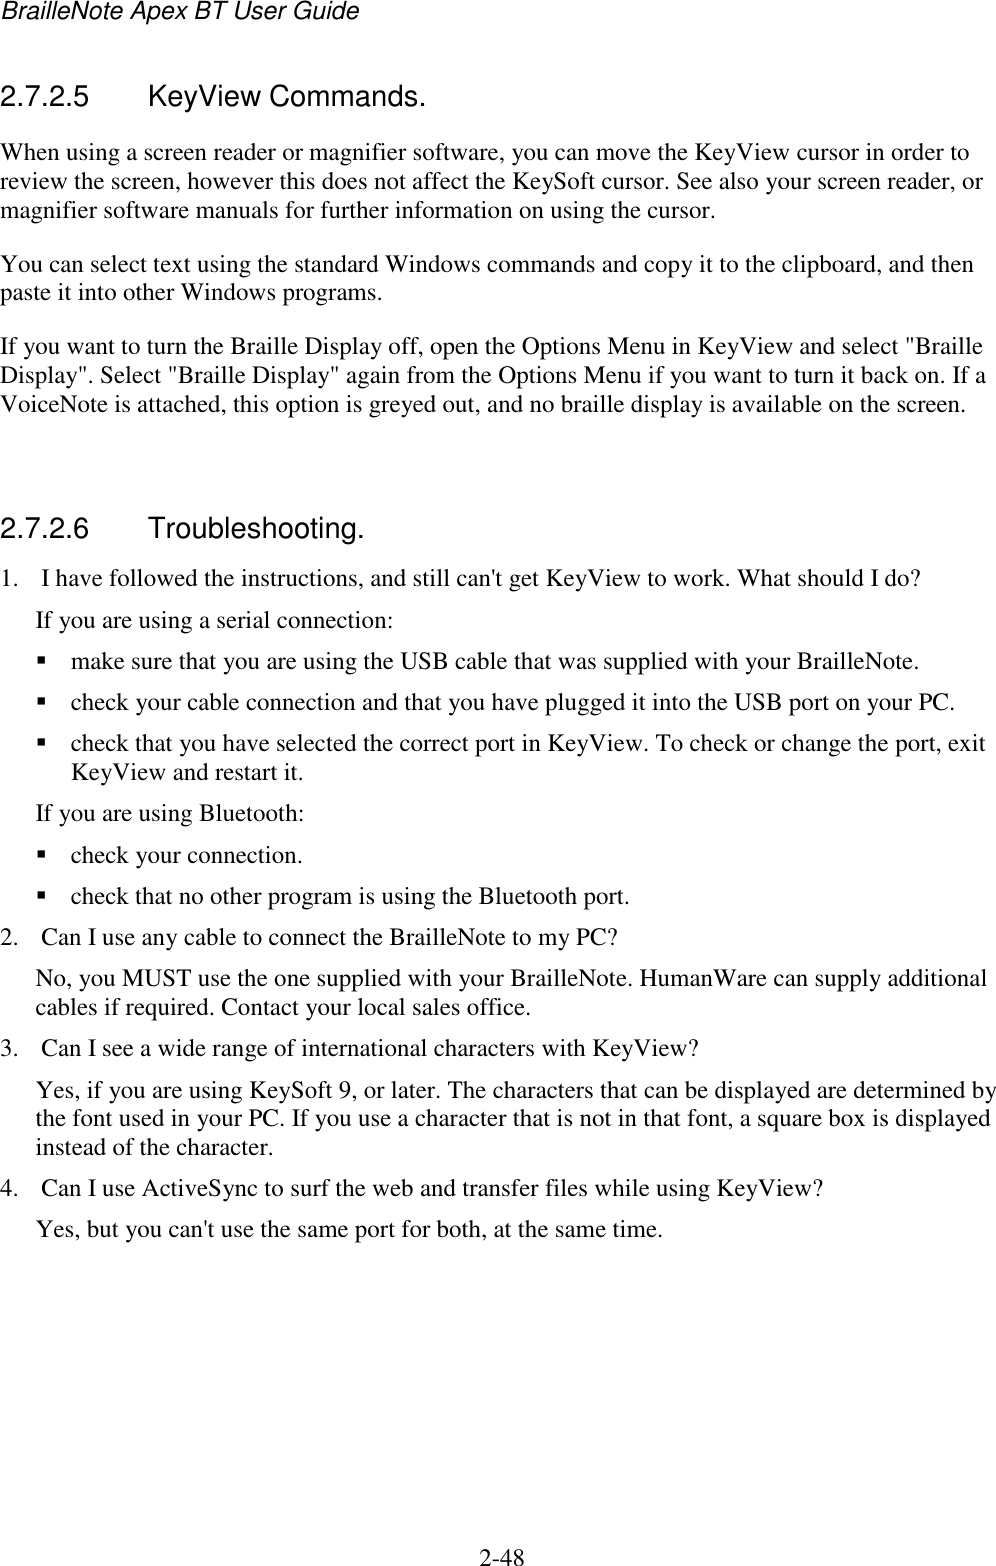 BrailleNote Apex BT User Guide   2-48   2.7.2.5  KeyView Commands. When using a screen reader or magnifier software, you can move the KeyView cursor in order to review the screen, however this does not affect the KeySoft cursor. See also your screen reader, or magnifier software manuals for further information on using the cursor.  You can select text using the standard Windows commands and copy it to the clipboard, and then paste it into other Windows programs. If you want to turn the Braille Display off, open the Options Menu in KeyView and select &quot;Braille Display&quot;. Select &quot;Braille Display&quot; again from the Options Menu if you want to turn it back on. If a VoiceNote is attached, this option is greyed out, and no braille display is available on the screen.   2.7.2.6  Troubleshooting. 1. I have followed the instructions, and still can&apos;t get KeyView to work. What should I do? If you are using a serial connection:   make sure that you are using the USB cable that was supplied with your BrailleNote.   check your cable connection and that you have plugged it into the USB port on your PC.  check that you have selected the correct port in KeyView. To check or change the port, exit KeyView and restart it. If you are using Bluetooth:  check your connection.   check that no other program is using the Bluetooth port. 2. Can I use any cable to connect the BrailleNote to my PC? No, you MUST use the one supplied with your BrailleNote. HumanWare can supply additional cables if required. Contact your local sales office. 3. Can I see a wide range of international characters with KeyView? Yes, if you are using KeySoft 9, or later. The characters that can be displayed are determined by the font used in your PC. If you use a character that is not in that font, a square box is displayed instead of the character. 4. Can I use ActiveSync to surf the web and transfer files while using KeyView? Yes, but you can&apos;t use the same port for both, at the same time.  